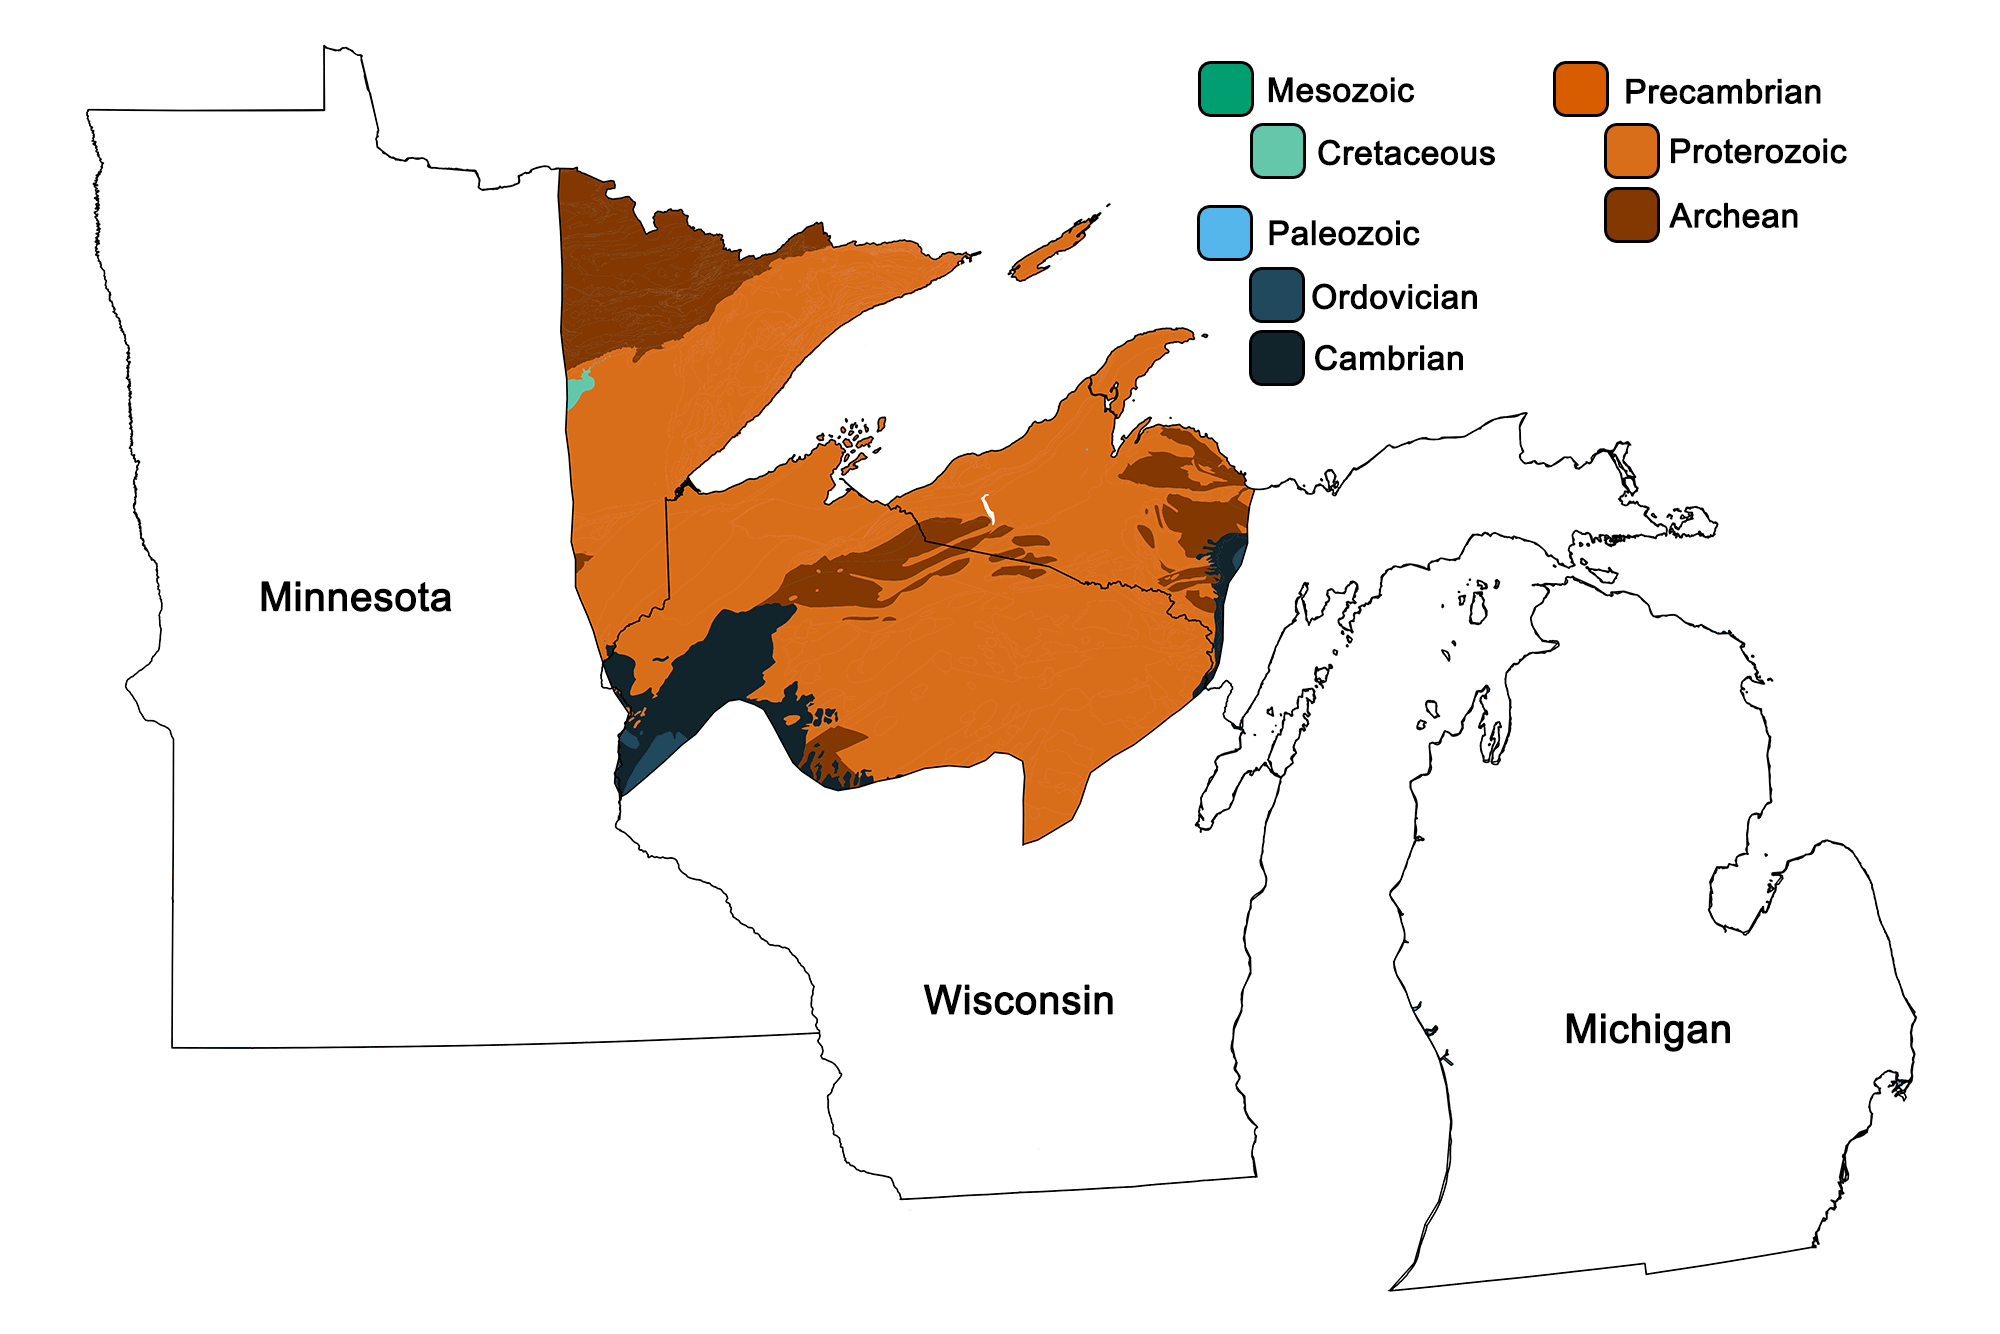 Geologic map of the Superior Upland region of the midwestern United States.